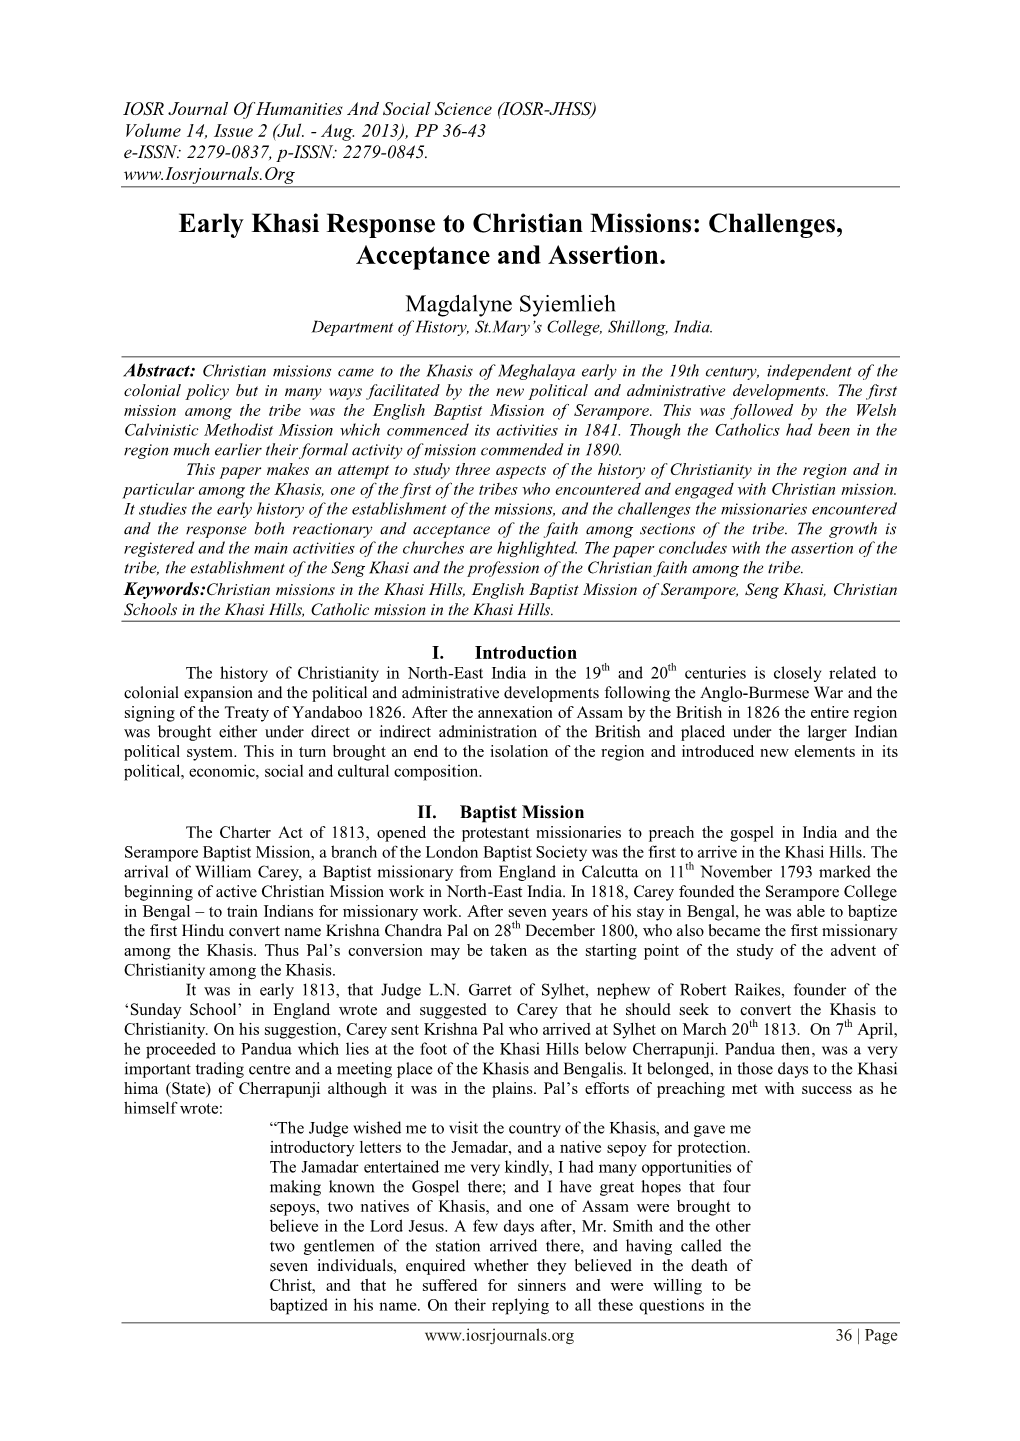 Early Khasi Response to Christian Missions: Challenges, Acceptance and Assertion